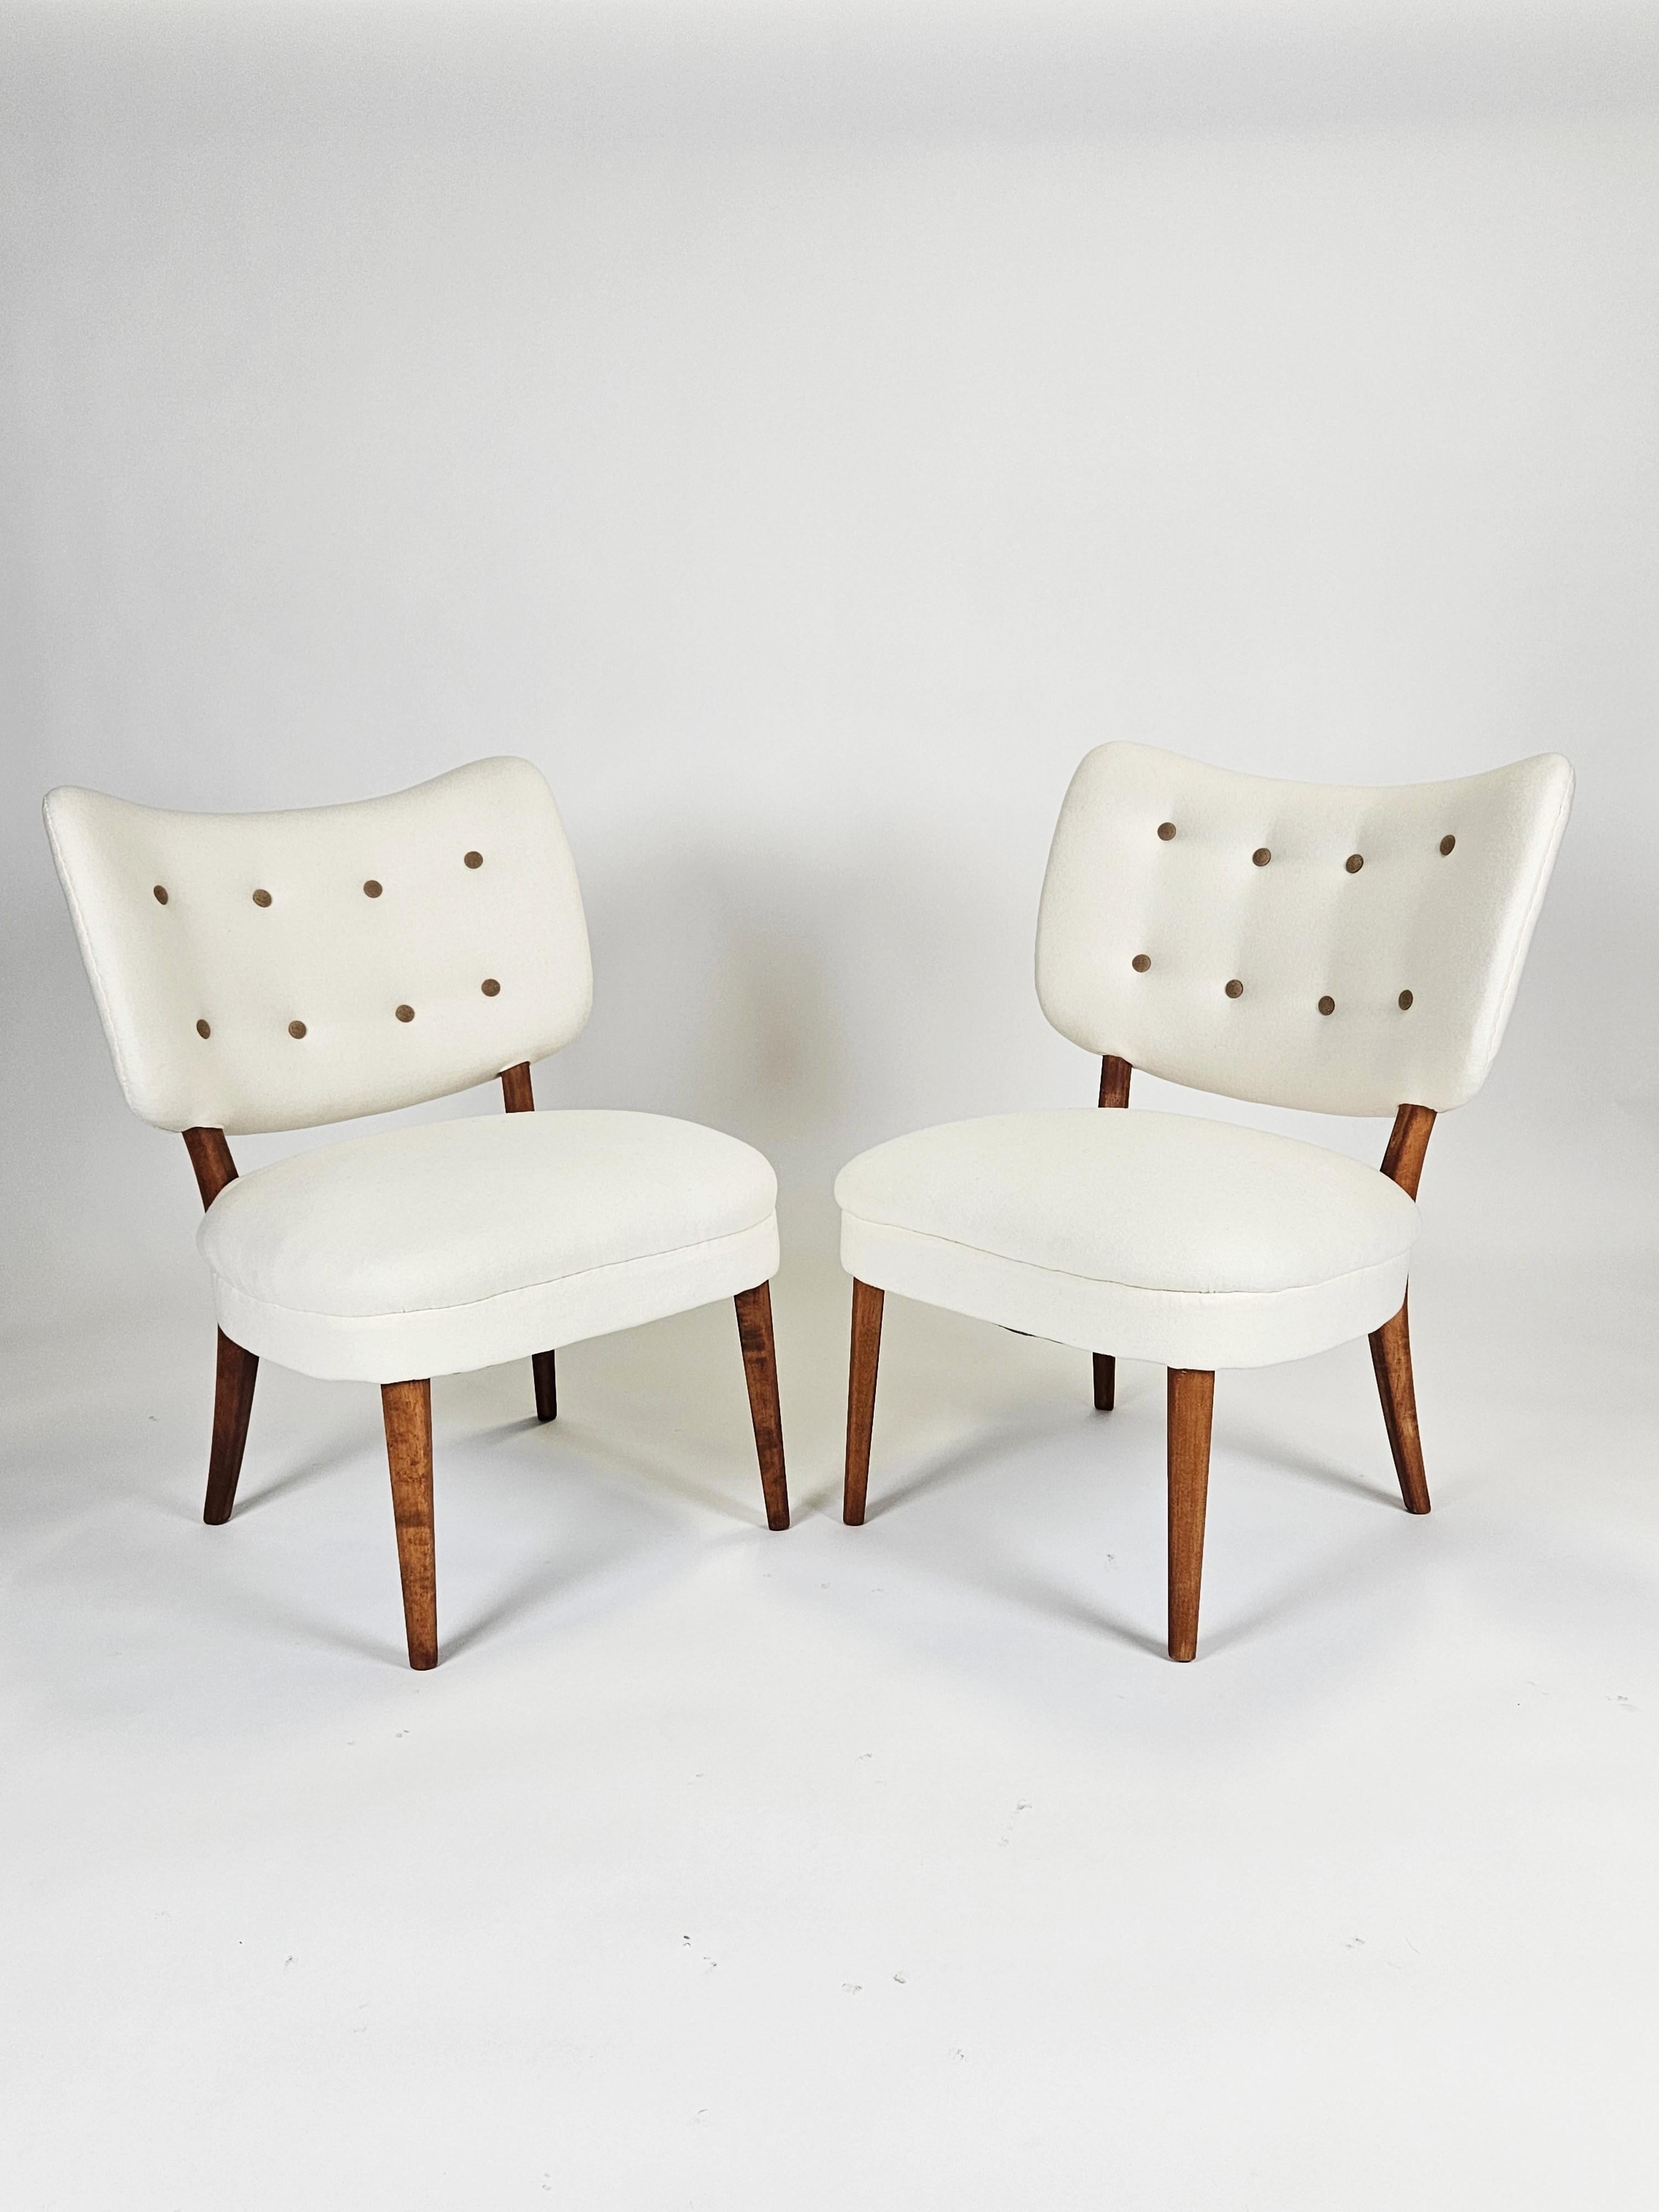 Elegant lounge chairs designed by Otto Schulz and produced by BOET in the 1940s. 

In the style of Scandinavian Modern. 

Beech frame with a wing back. Upholstered in white fabric with matching brown wool buttons. 